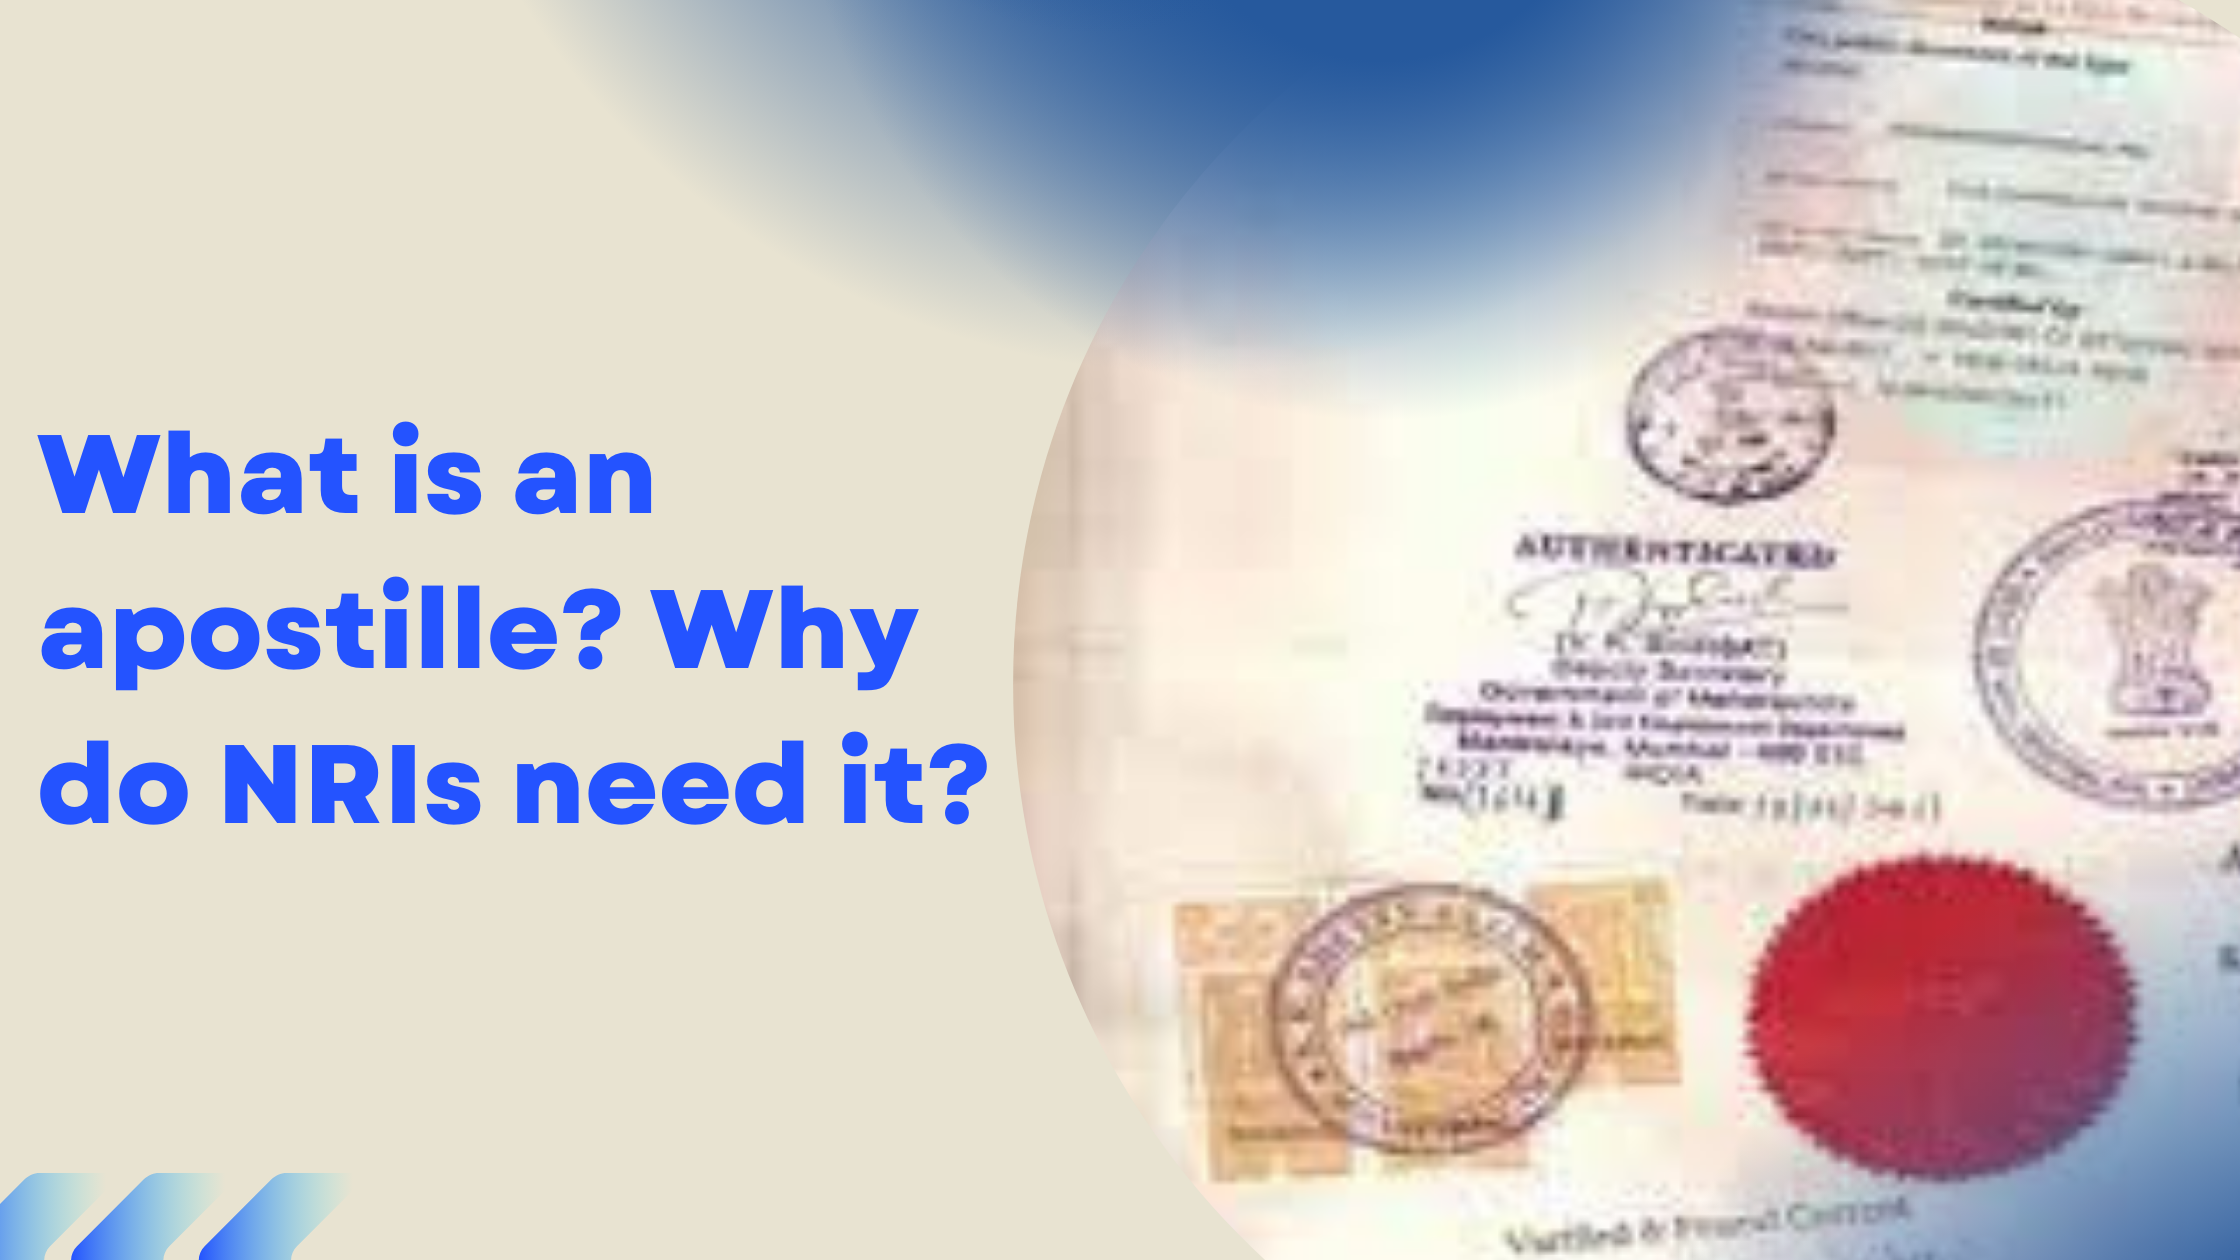 What is an apostille? Why do NRIs need it?